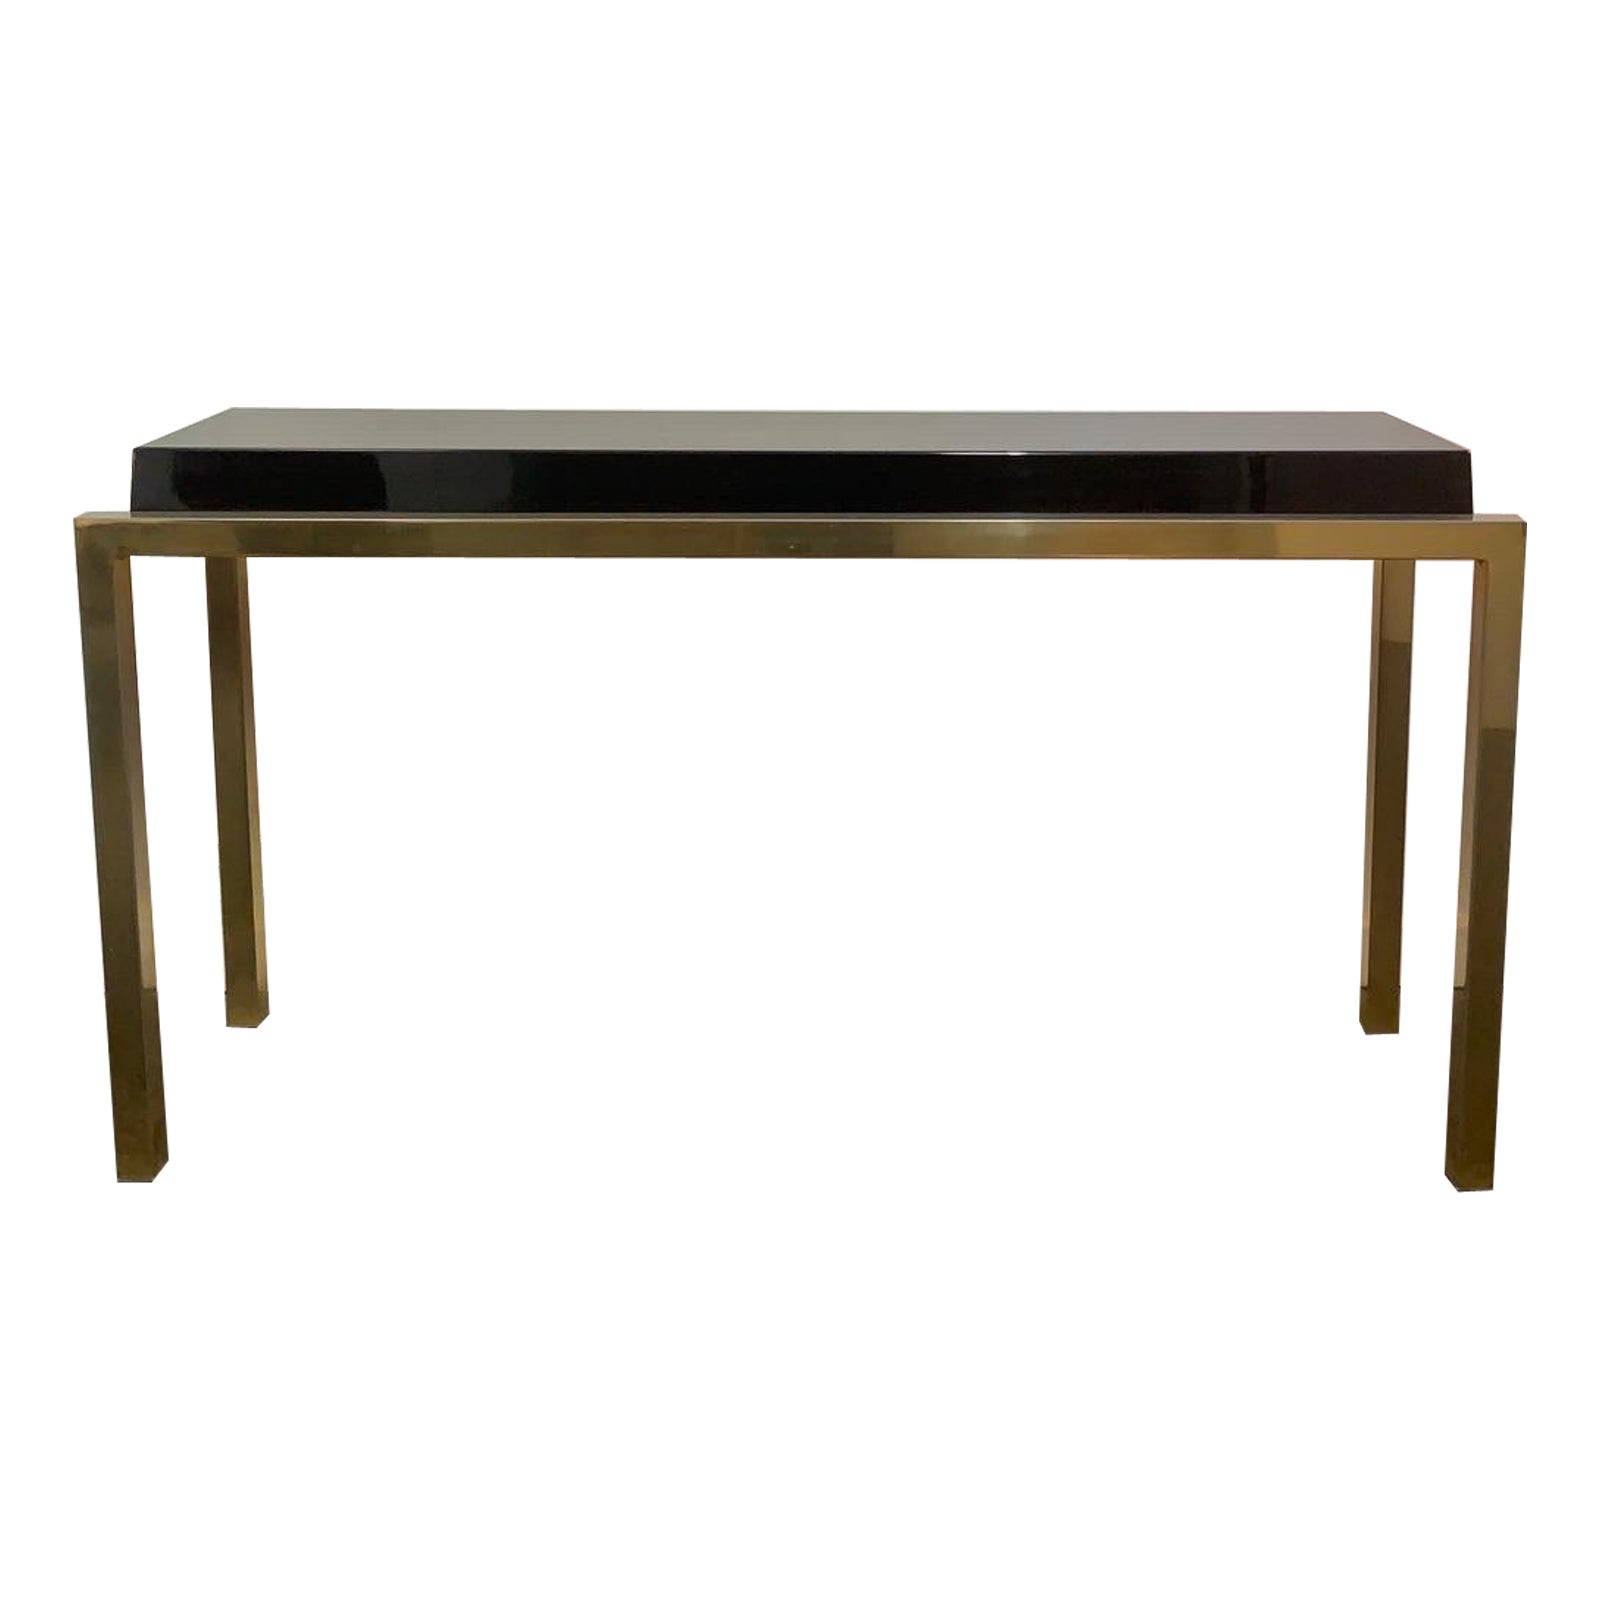 Console table circa 1970 in the manner of Guy Lefevre